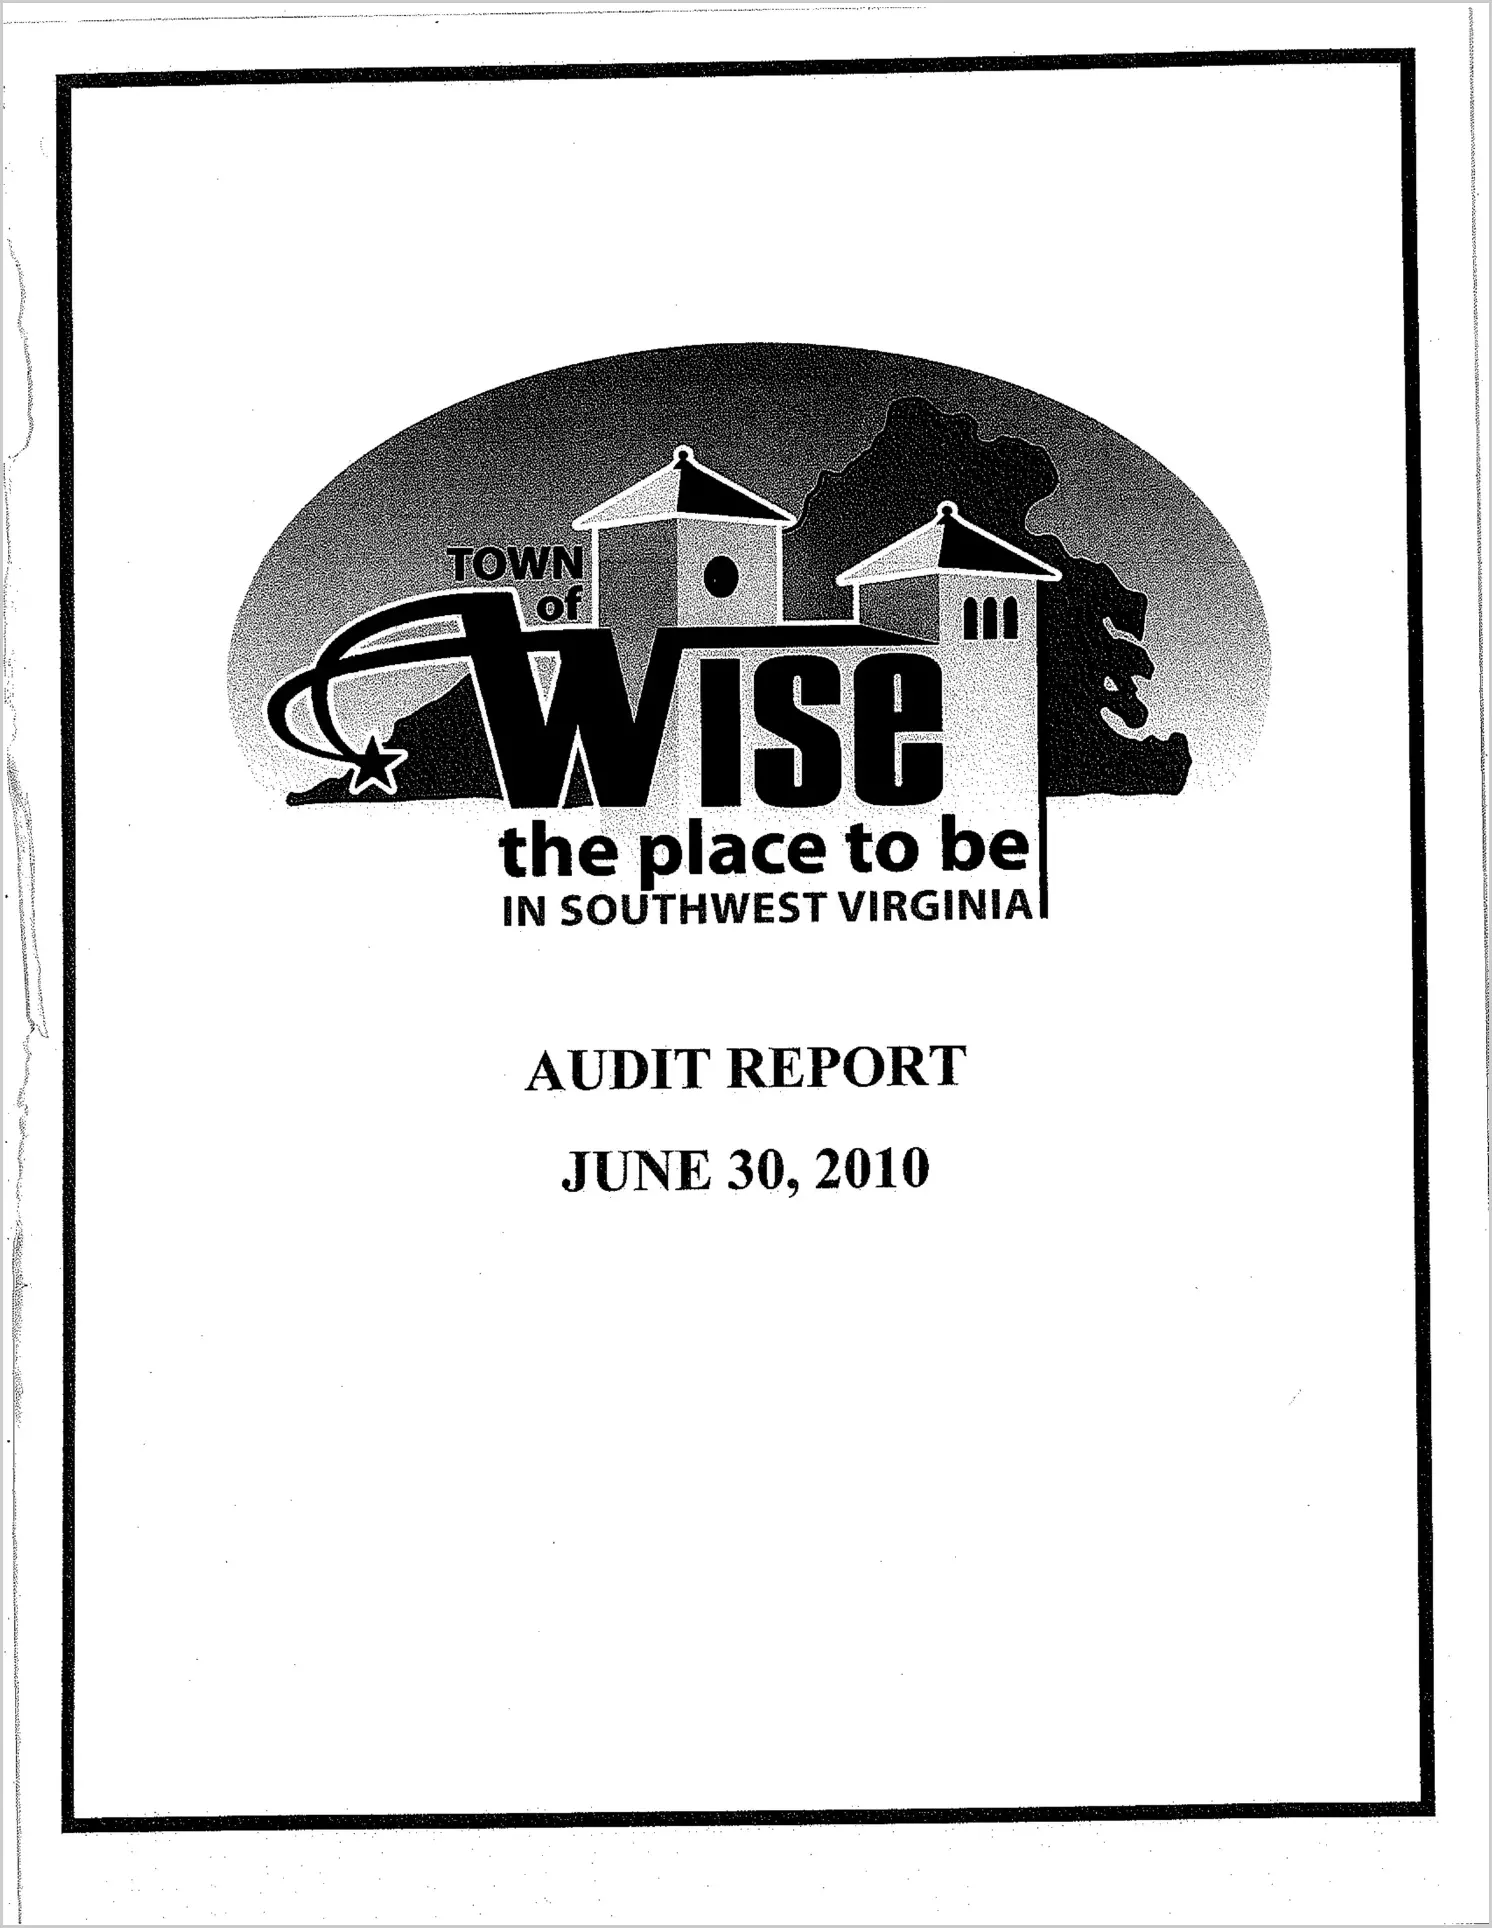 2010 Annual Financial Report for Town of Wise